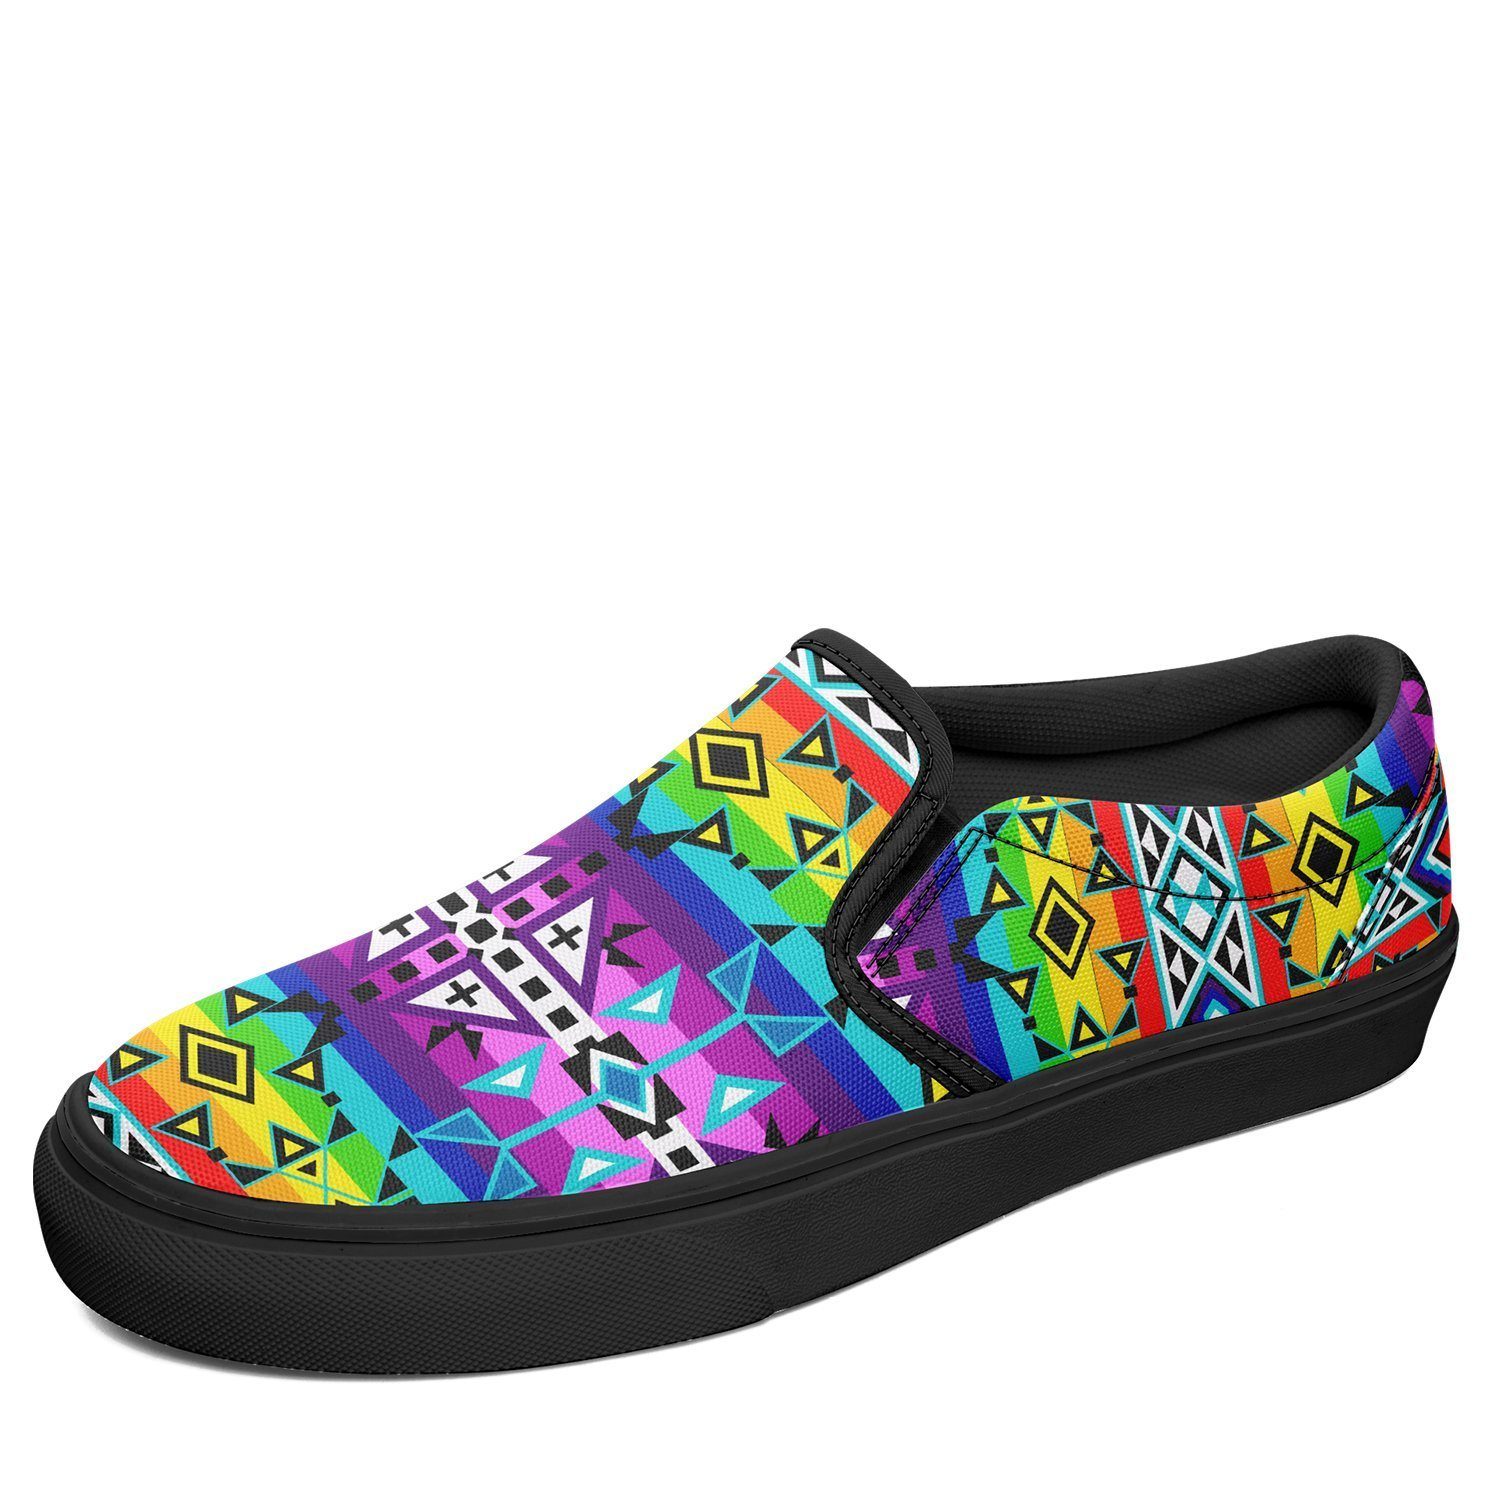 After the Rain Otoyimm Kid's Canvas Slip On Shoes 49 Dzine US Youth 1 / EUR 32 Black Sole 